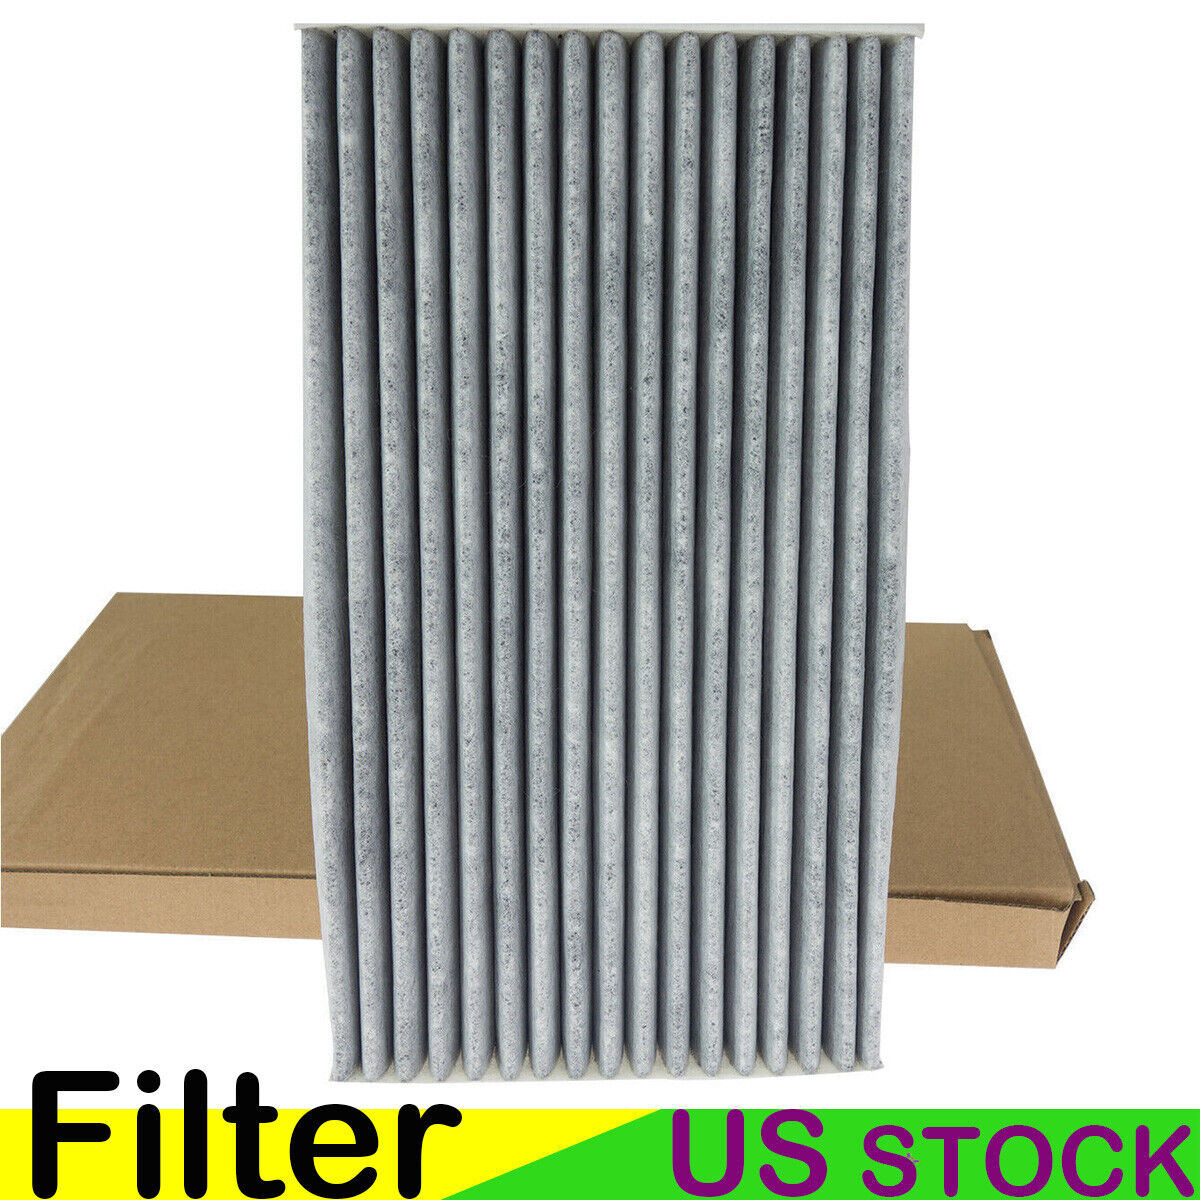  Activated Carbon Cabin AC Air Filter For Nissan Cube Juke Leaf Sentra 1.6 1.8L 